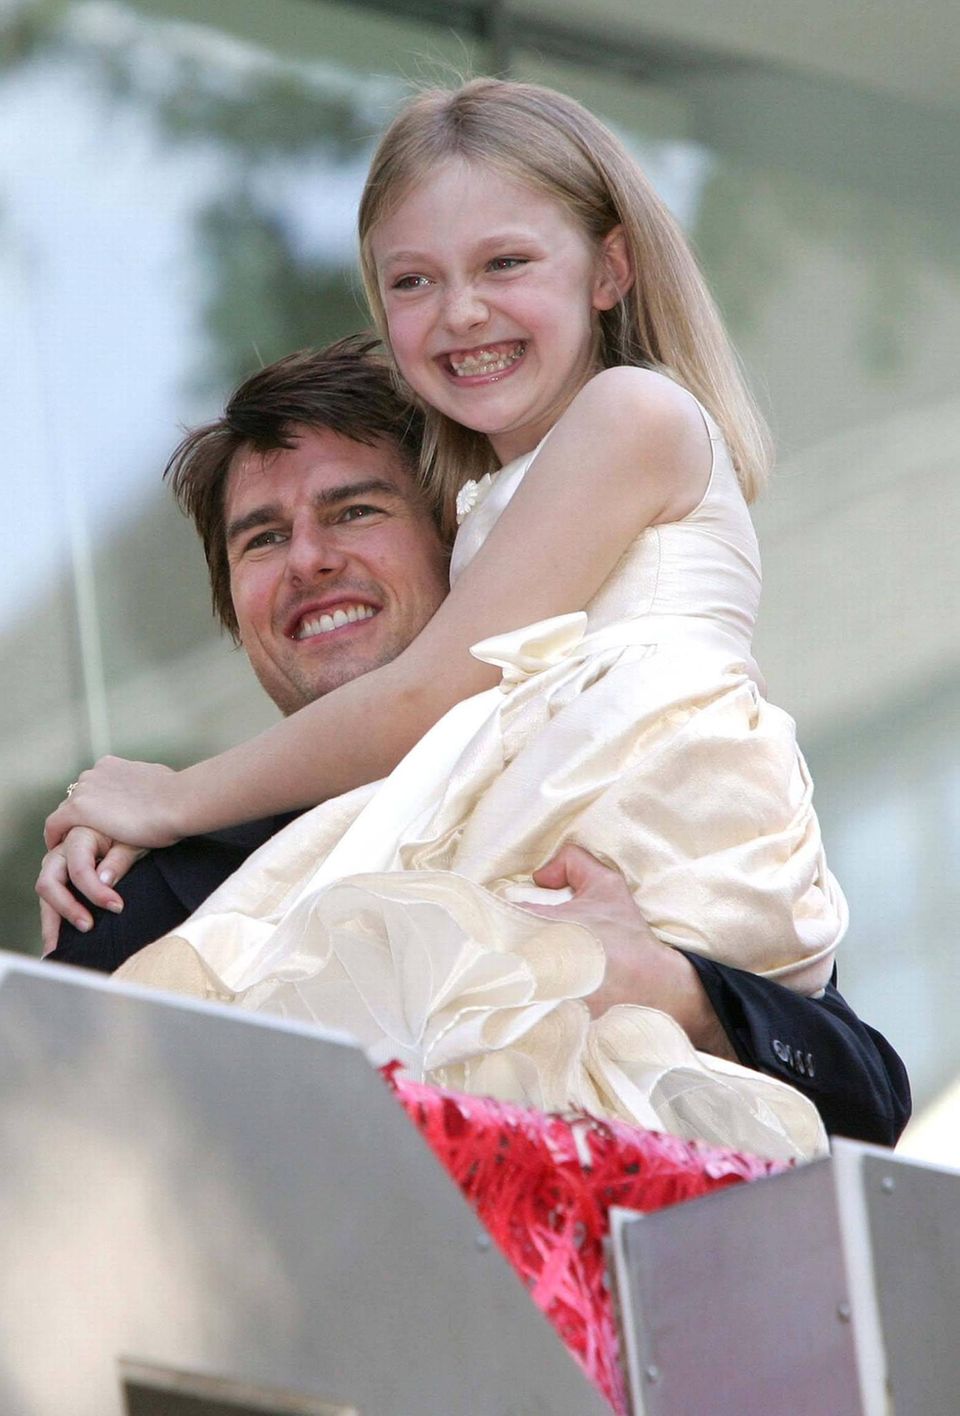 Tom Cruise and Dakota Fanning at the world premiere of "War of Worlds" in June 2005.